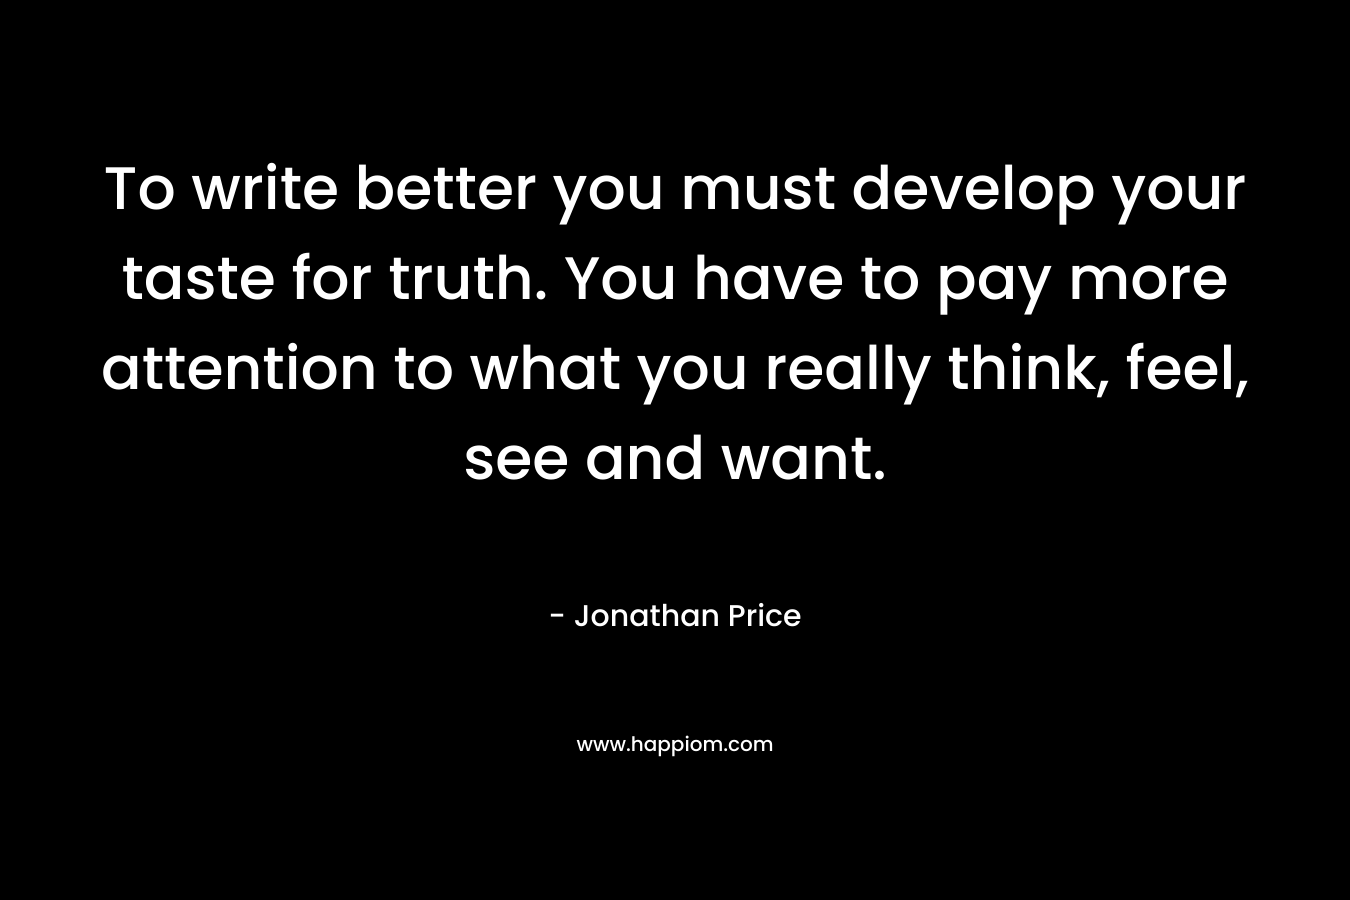 To write better you must develop your taste for truth. You have to pay more attention to what you really think, feel, see and want. – Jonathan Price